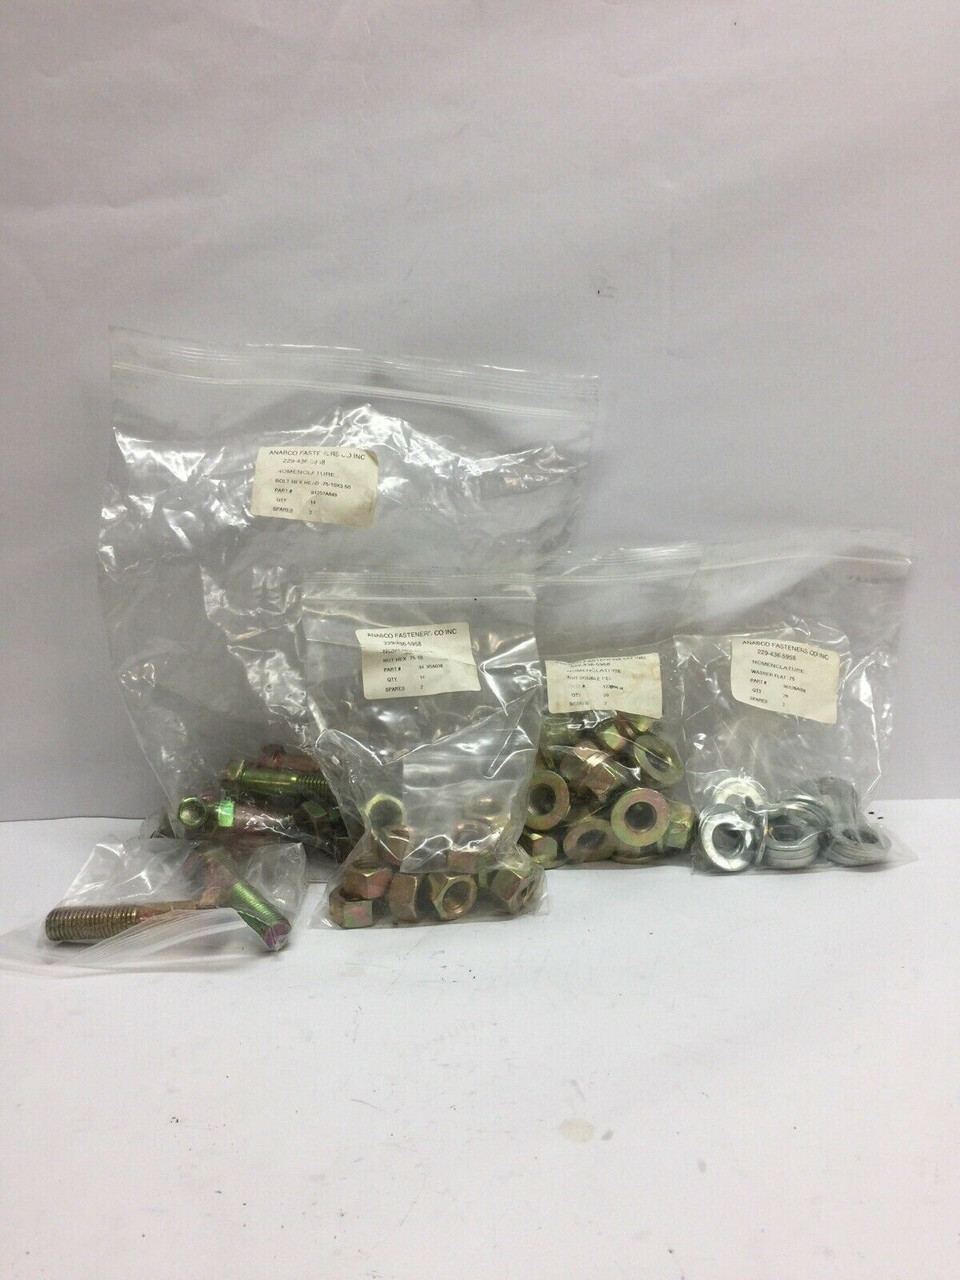 Hardware Kit 91257A849 Anabco Fasteners 